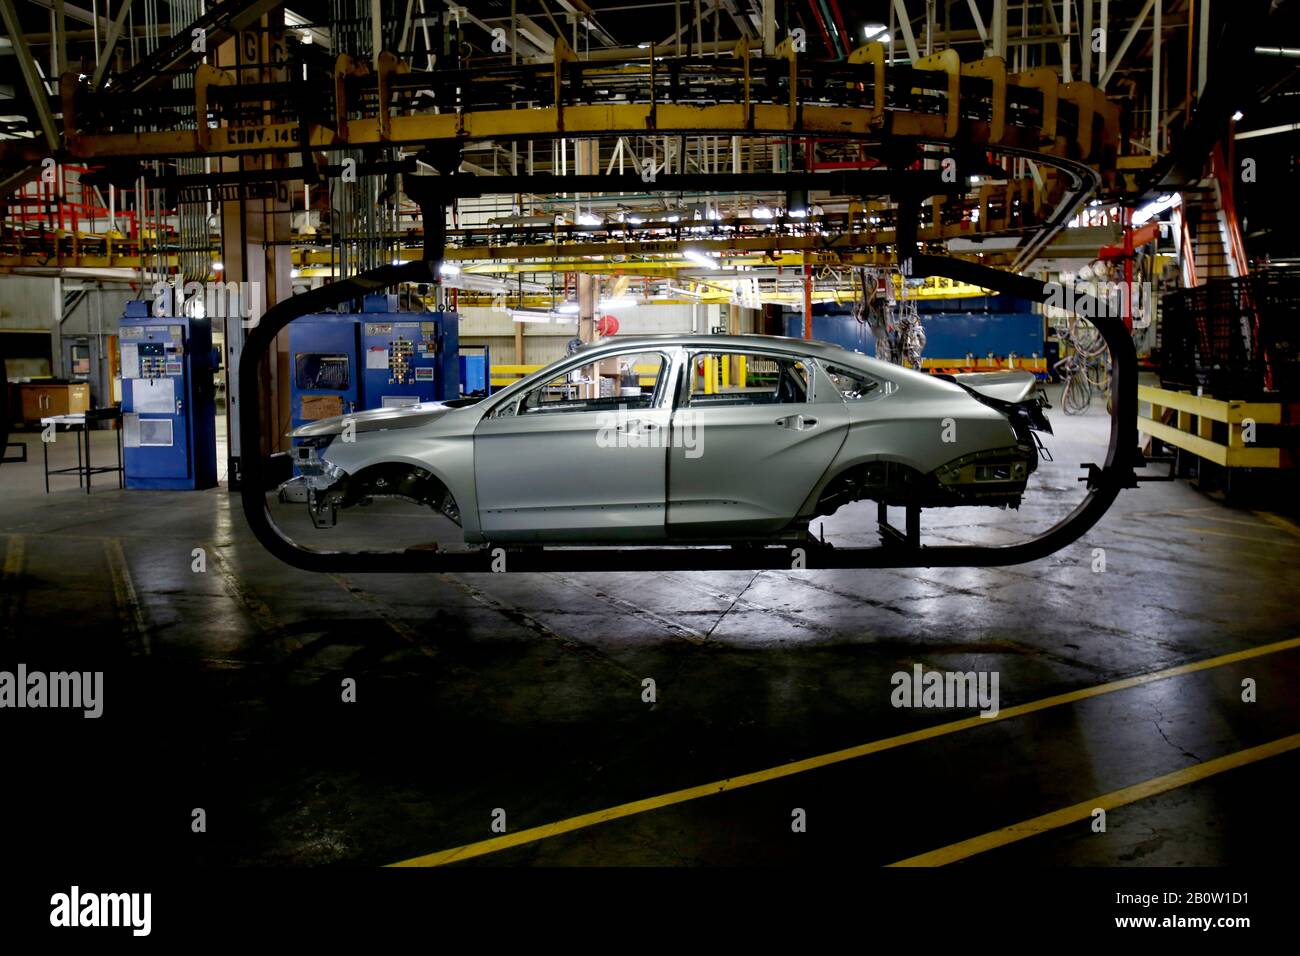 A 2020 Chevrolet Impala still yet to be painted is moved on a hoist on the  production line on Thursday, February 20, 2020 at the GM Detroit-Hamtramck  Assembly plant.The car is nearing